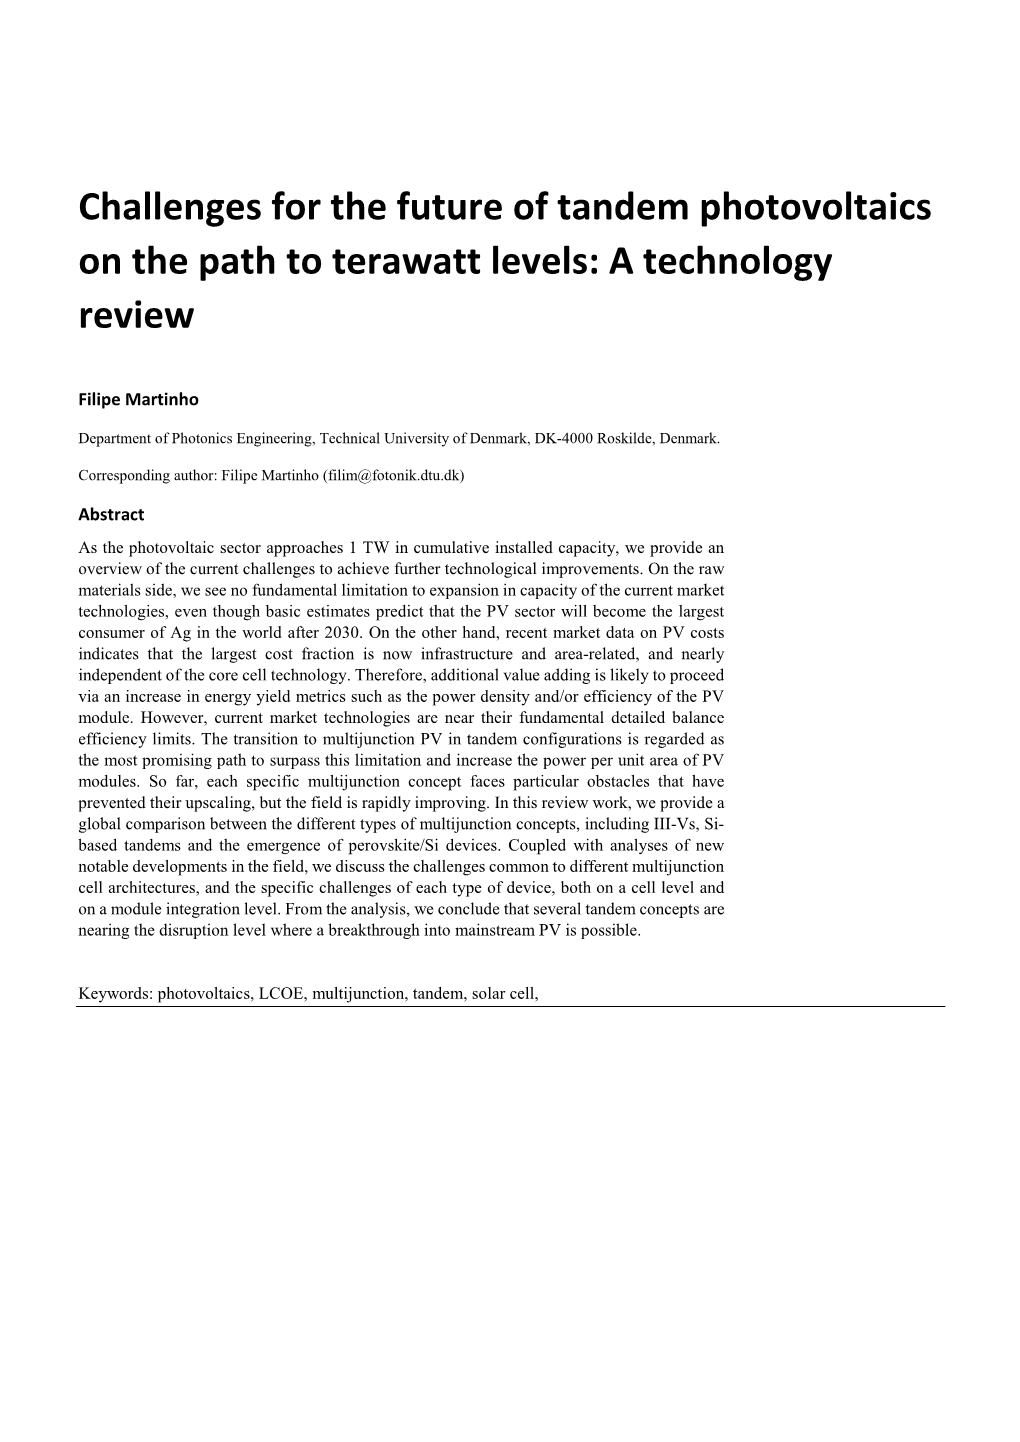 Challenges for the Future of Tandem Photovoltaics on the Path to Terawatt Levels: a Technology Review